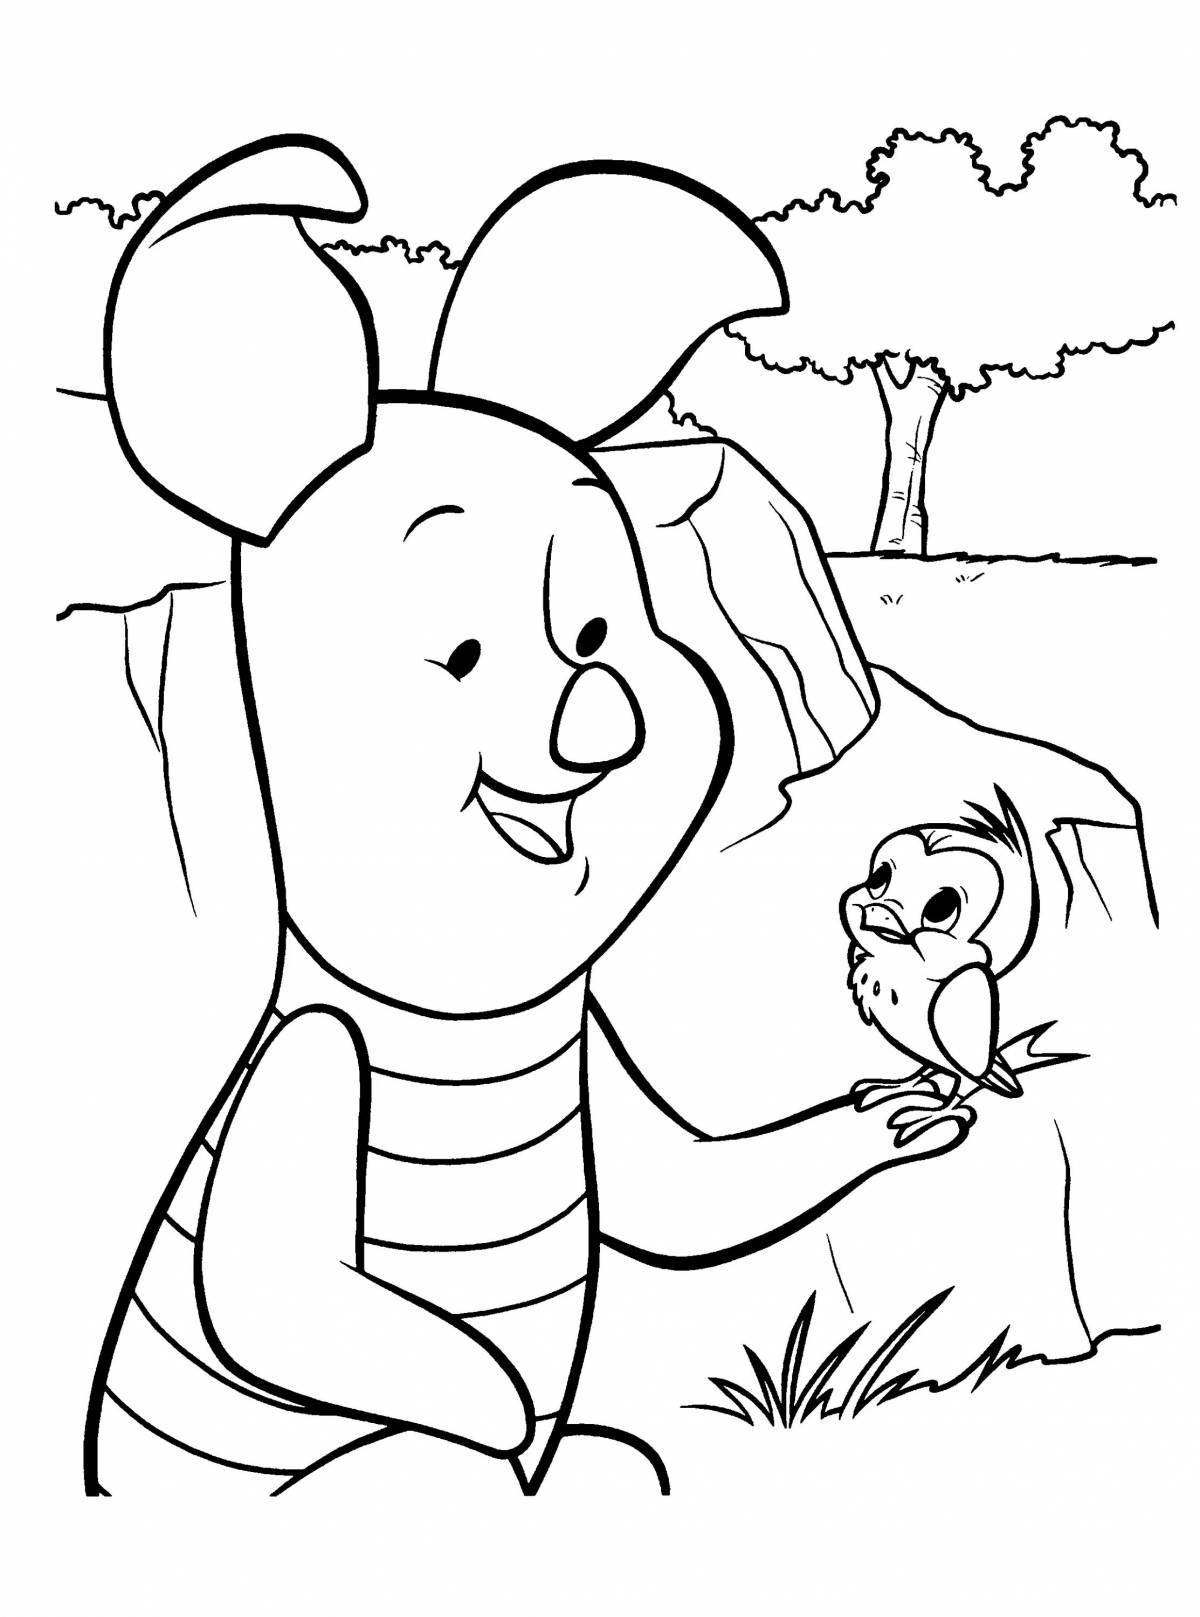 Coloring page sparkling winnie the pooh and his friends